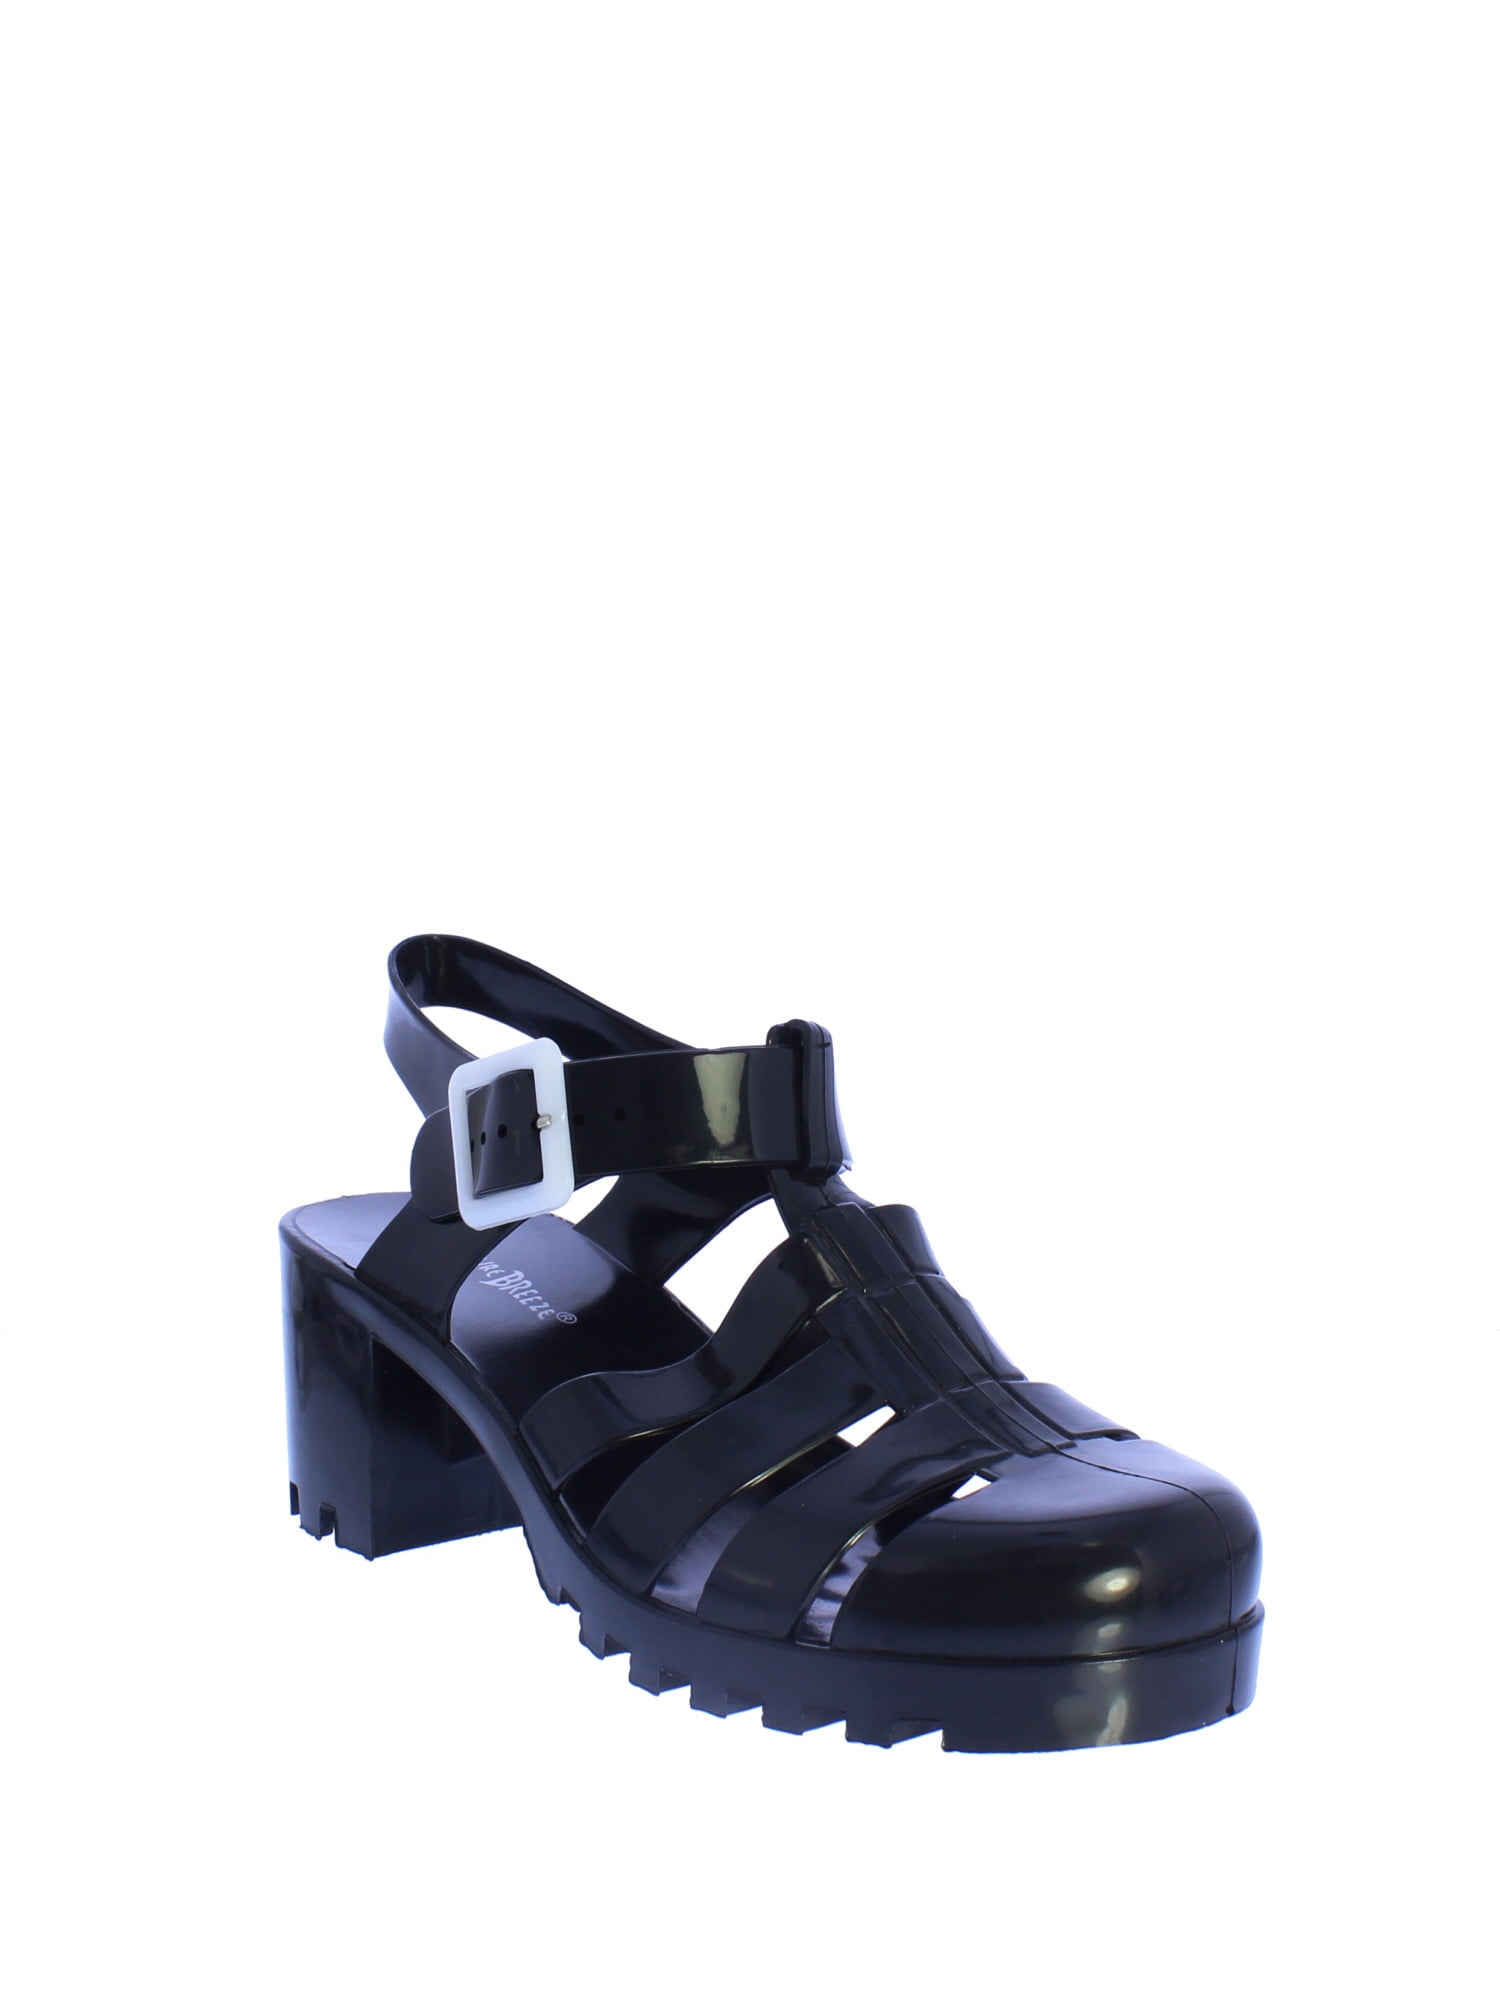 nature breeze jelly sandals